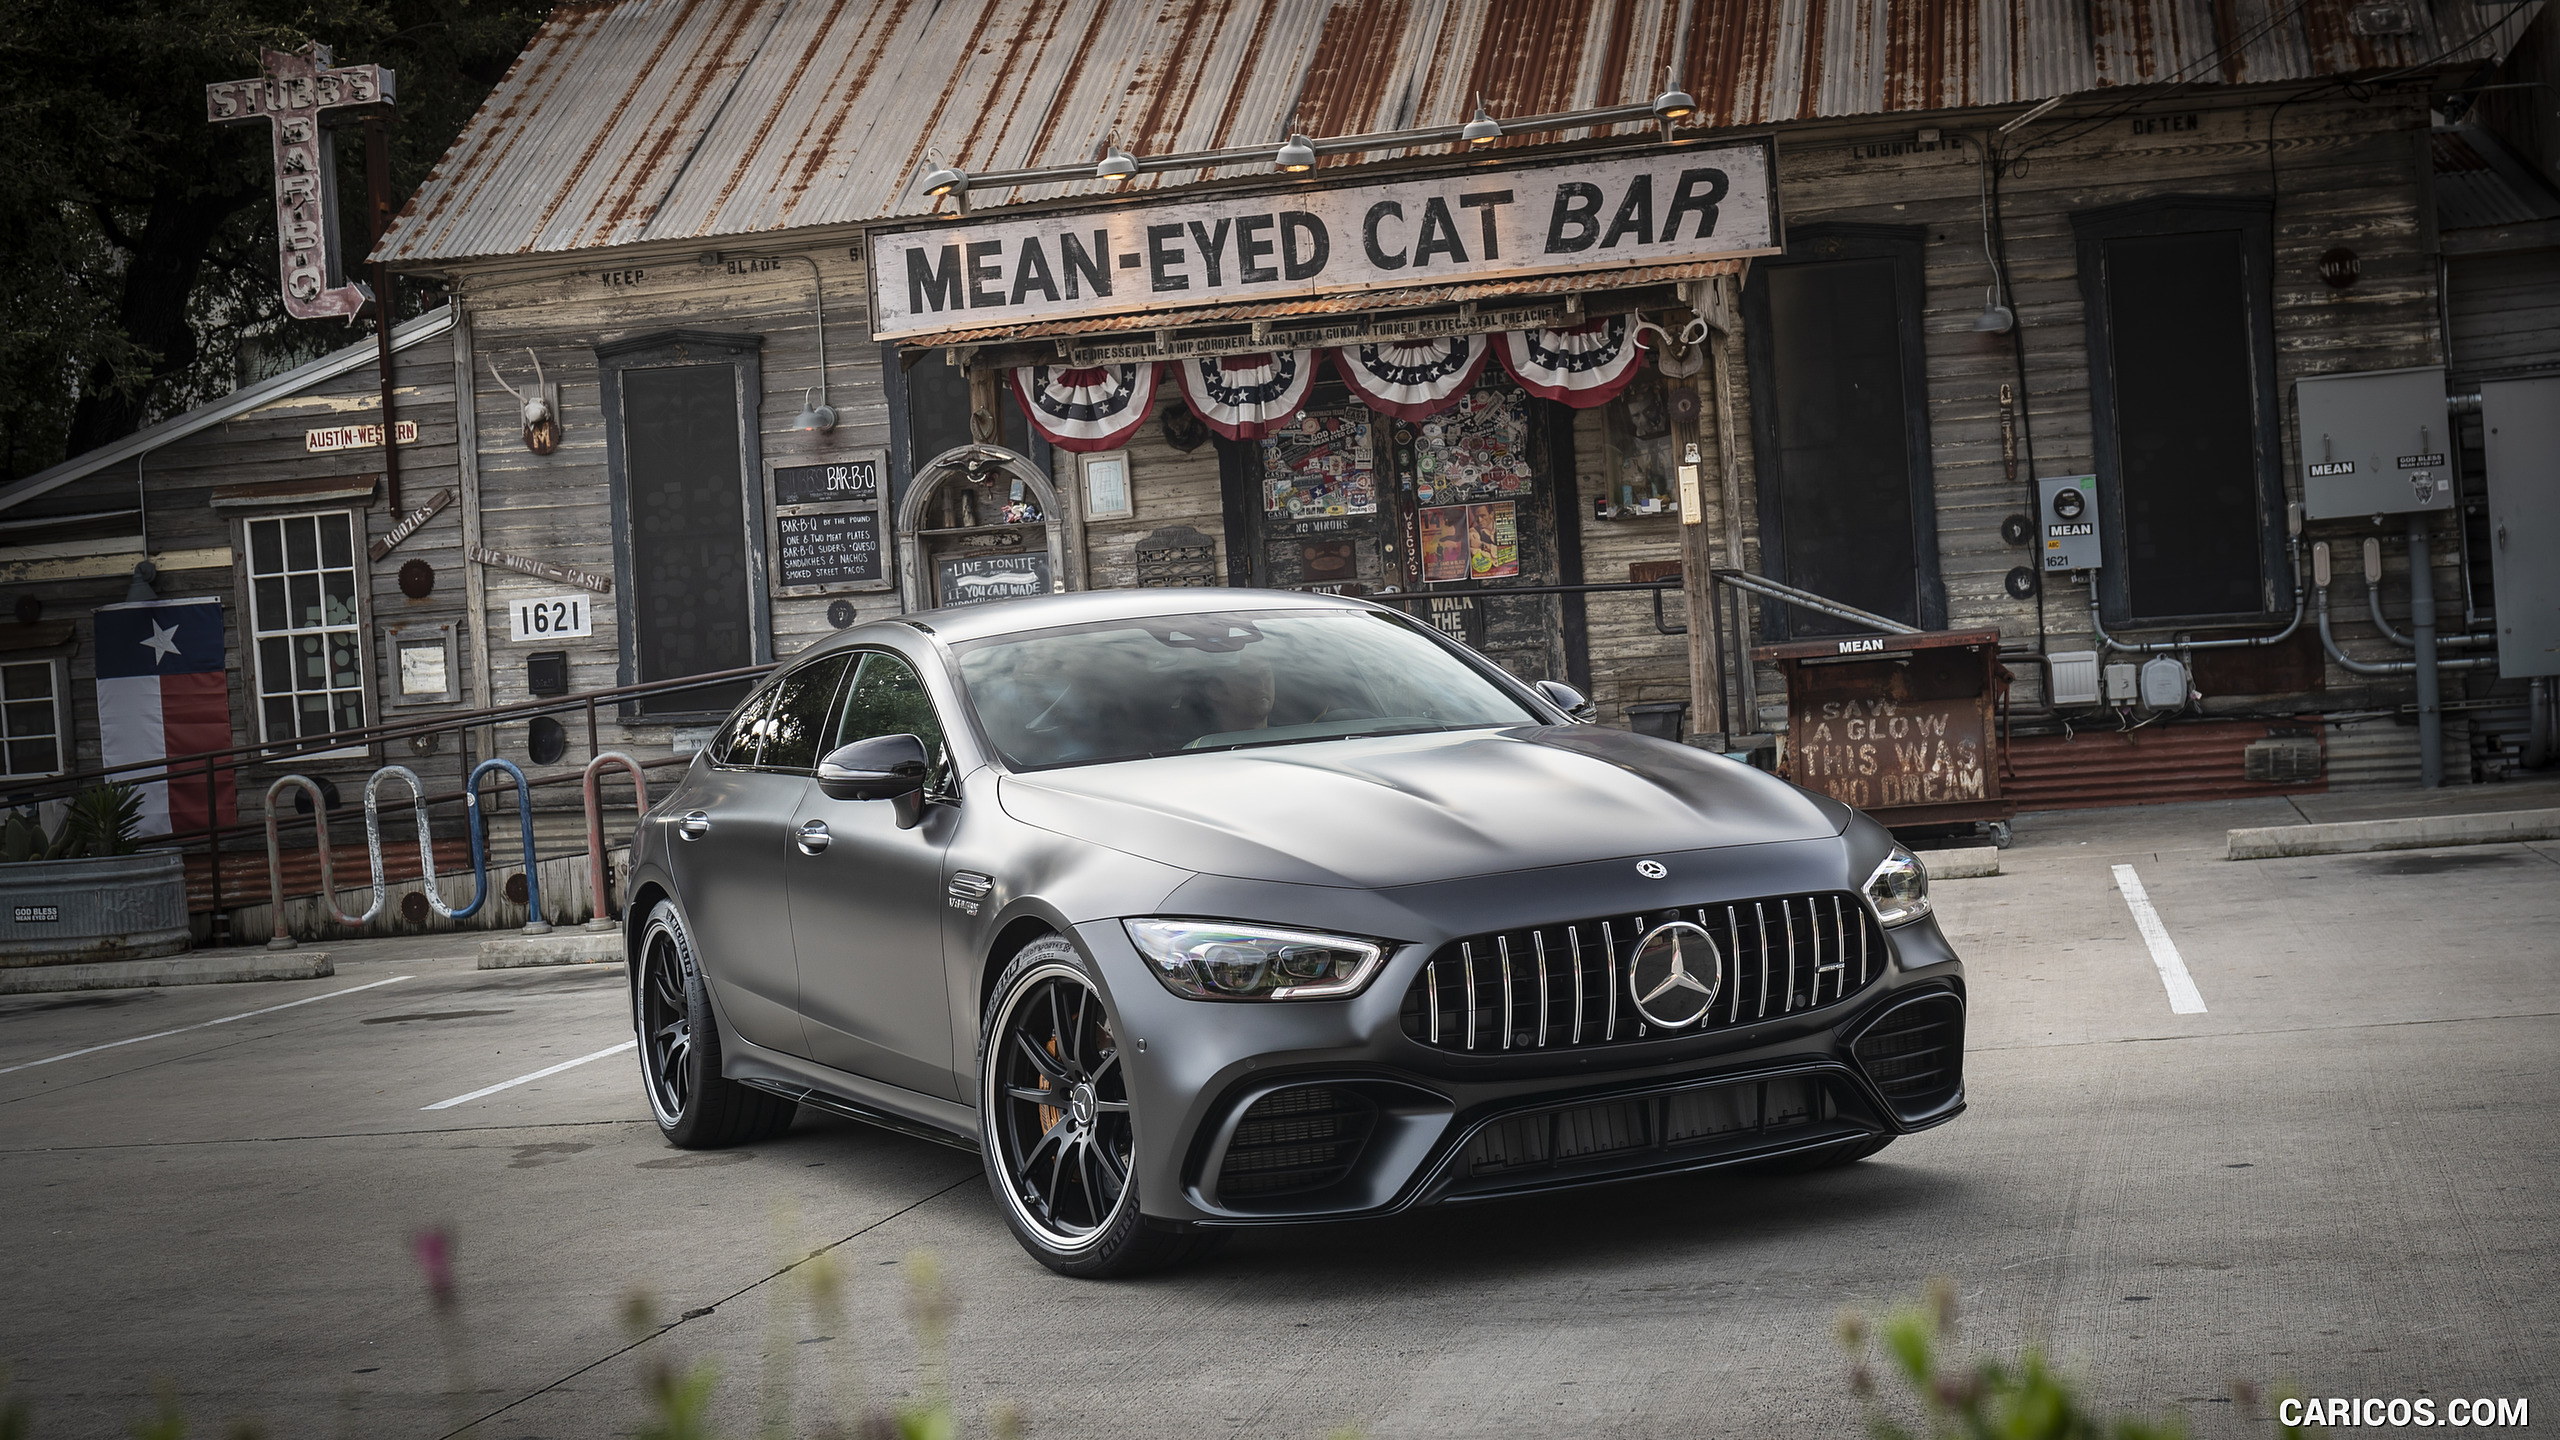 2019 Mercedes-AMG GT 63 S 4MATIC+ 4-Door Coupe - Front Three-Quarter, #219 of 427